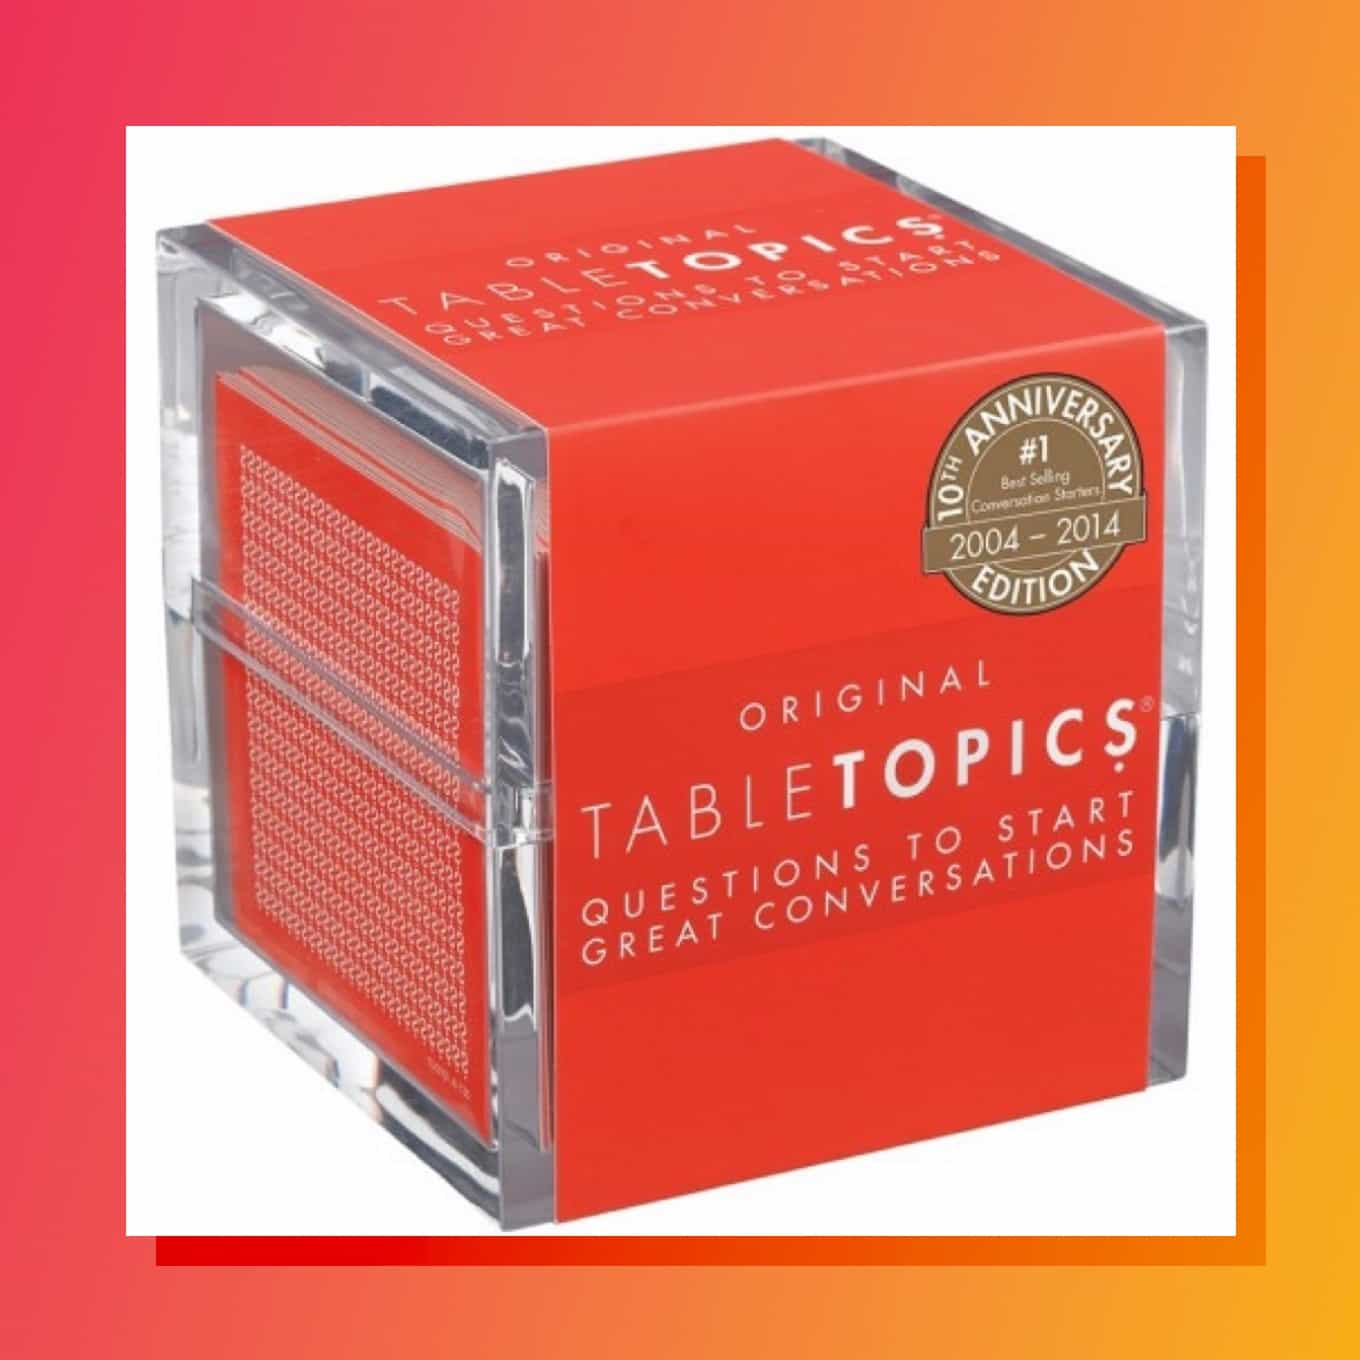 Square red box that says Original Table Topics Questions to start great conversations